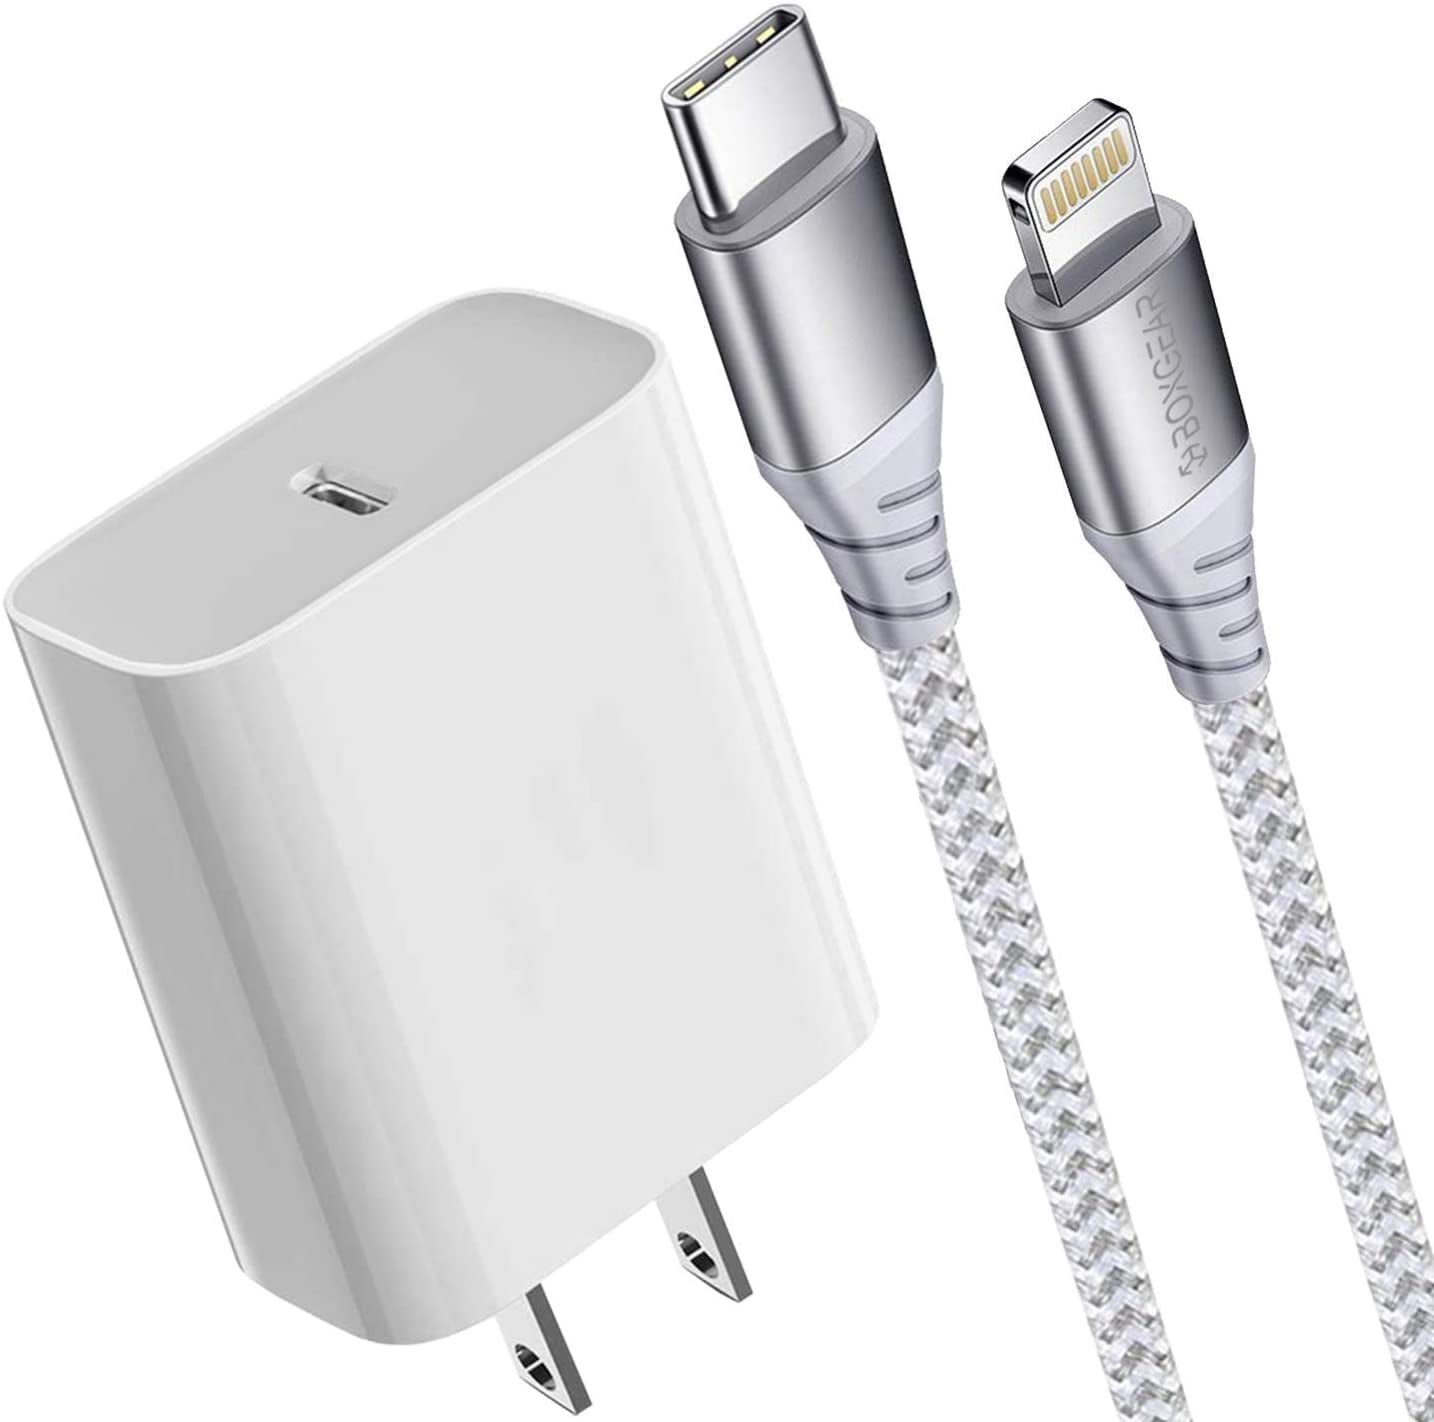 Apple iPhone 12 Pro Max Chargers